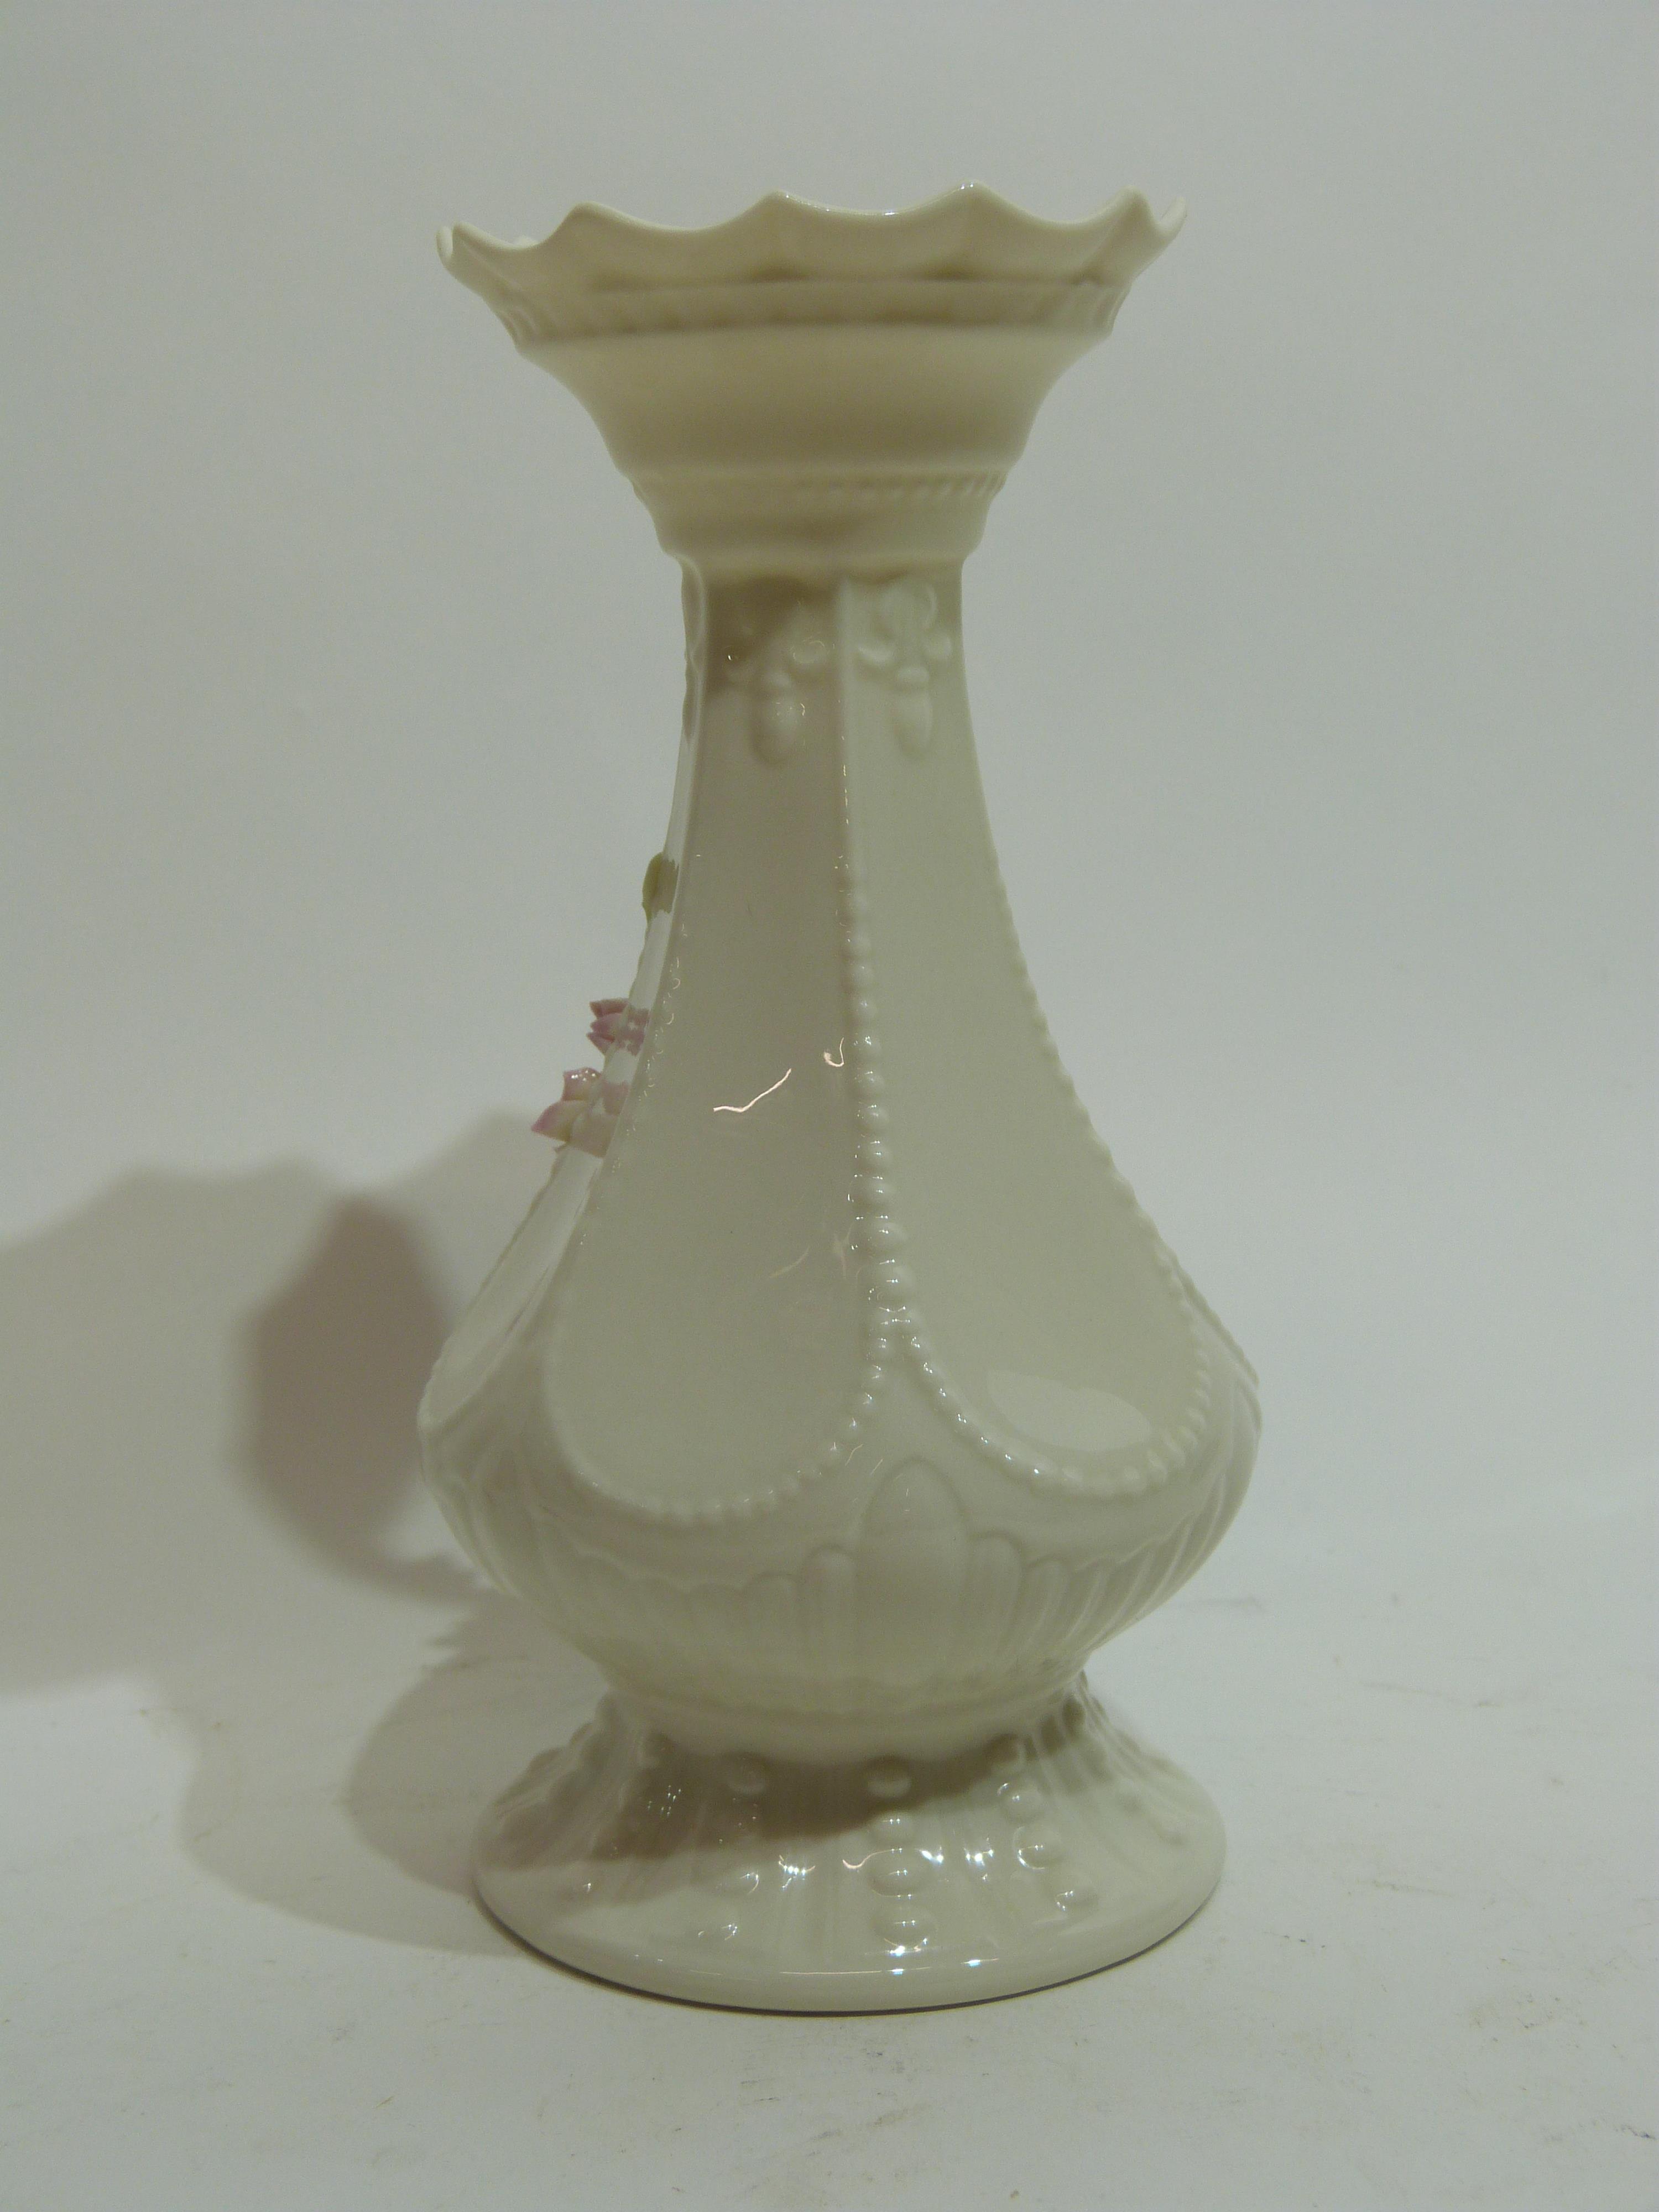 Belleek vase with a floral design of leaves and flowers in relief - Image 2 of 4